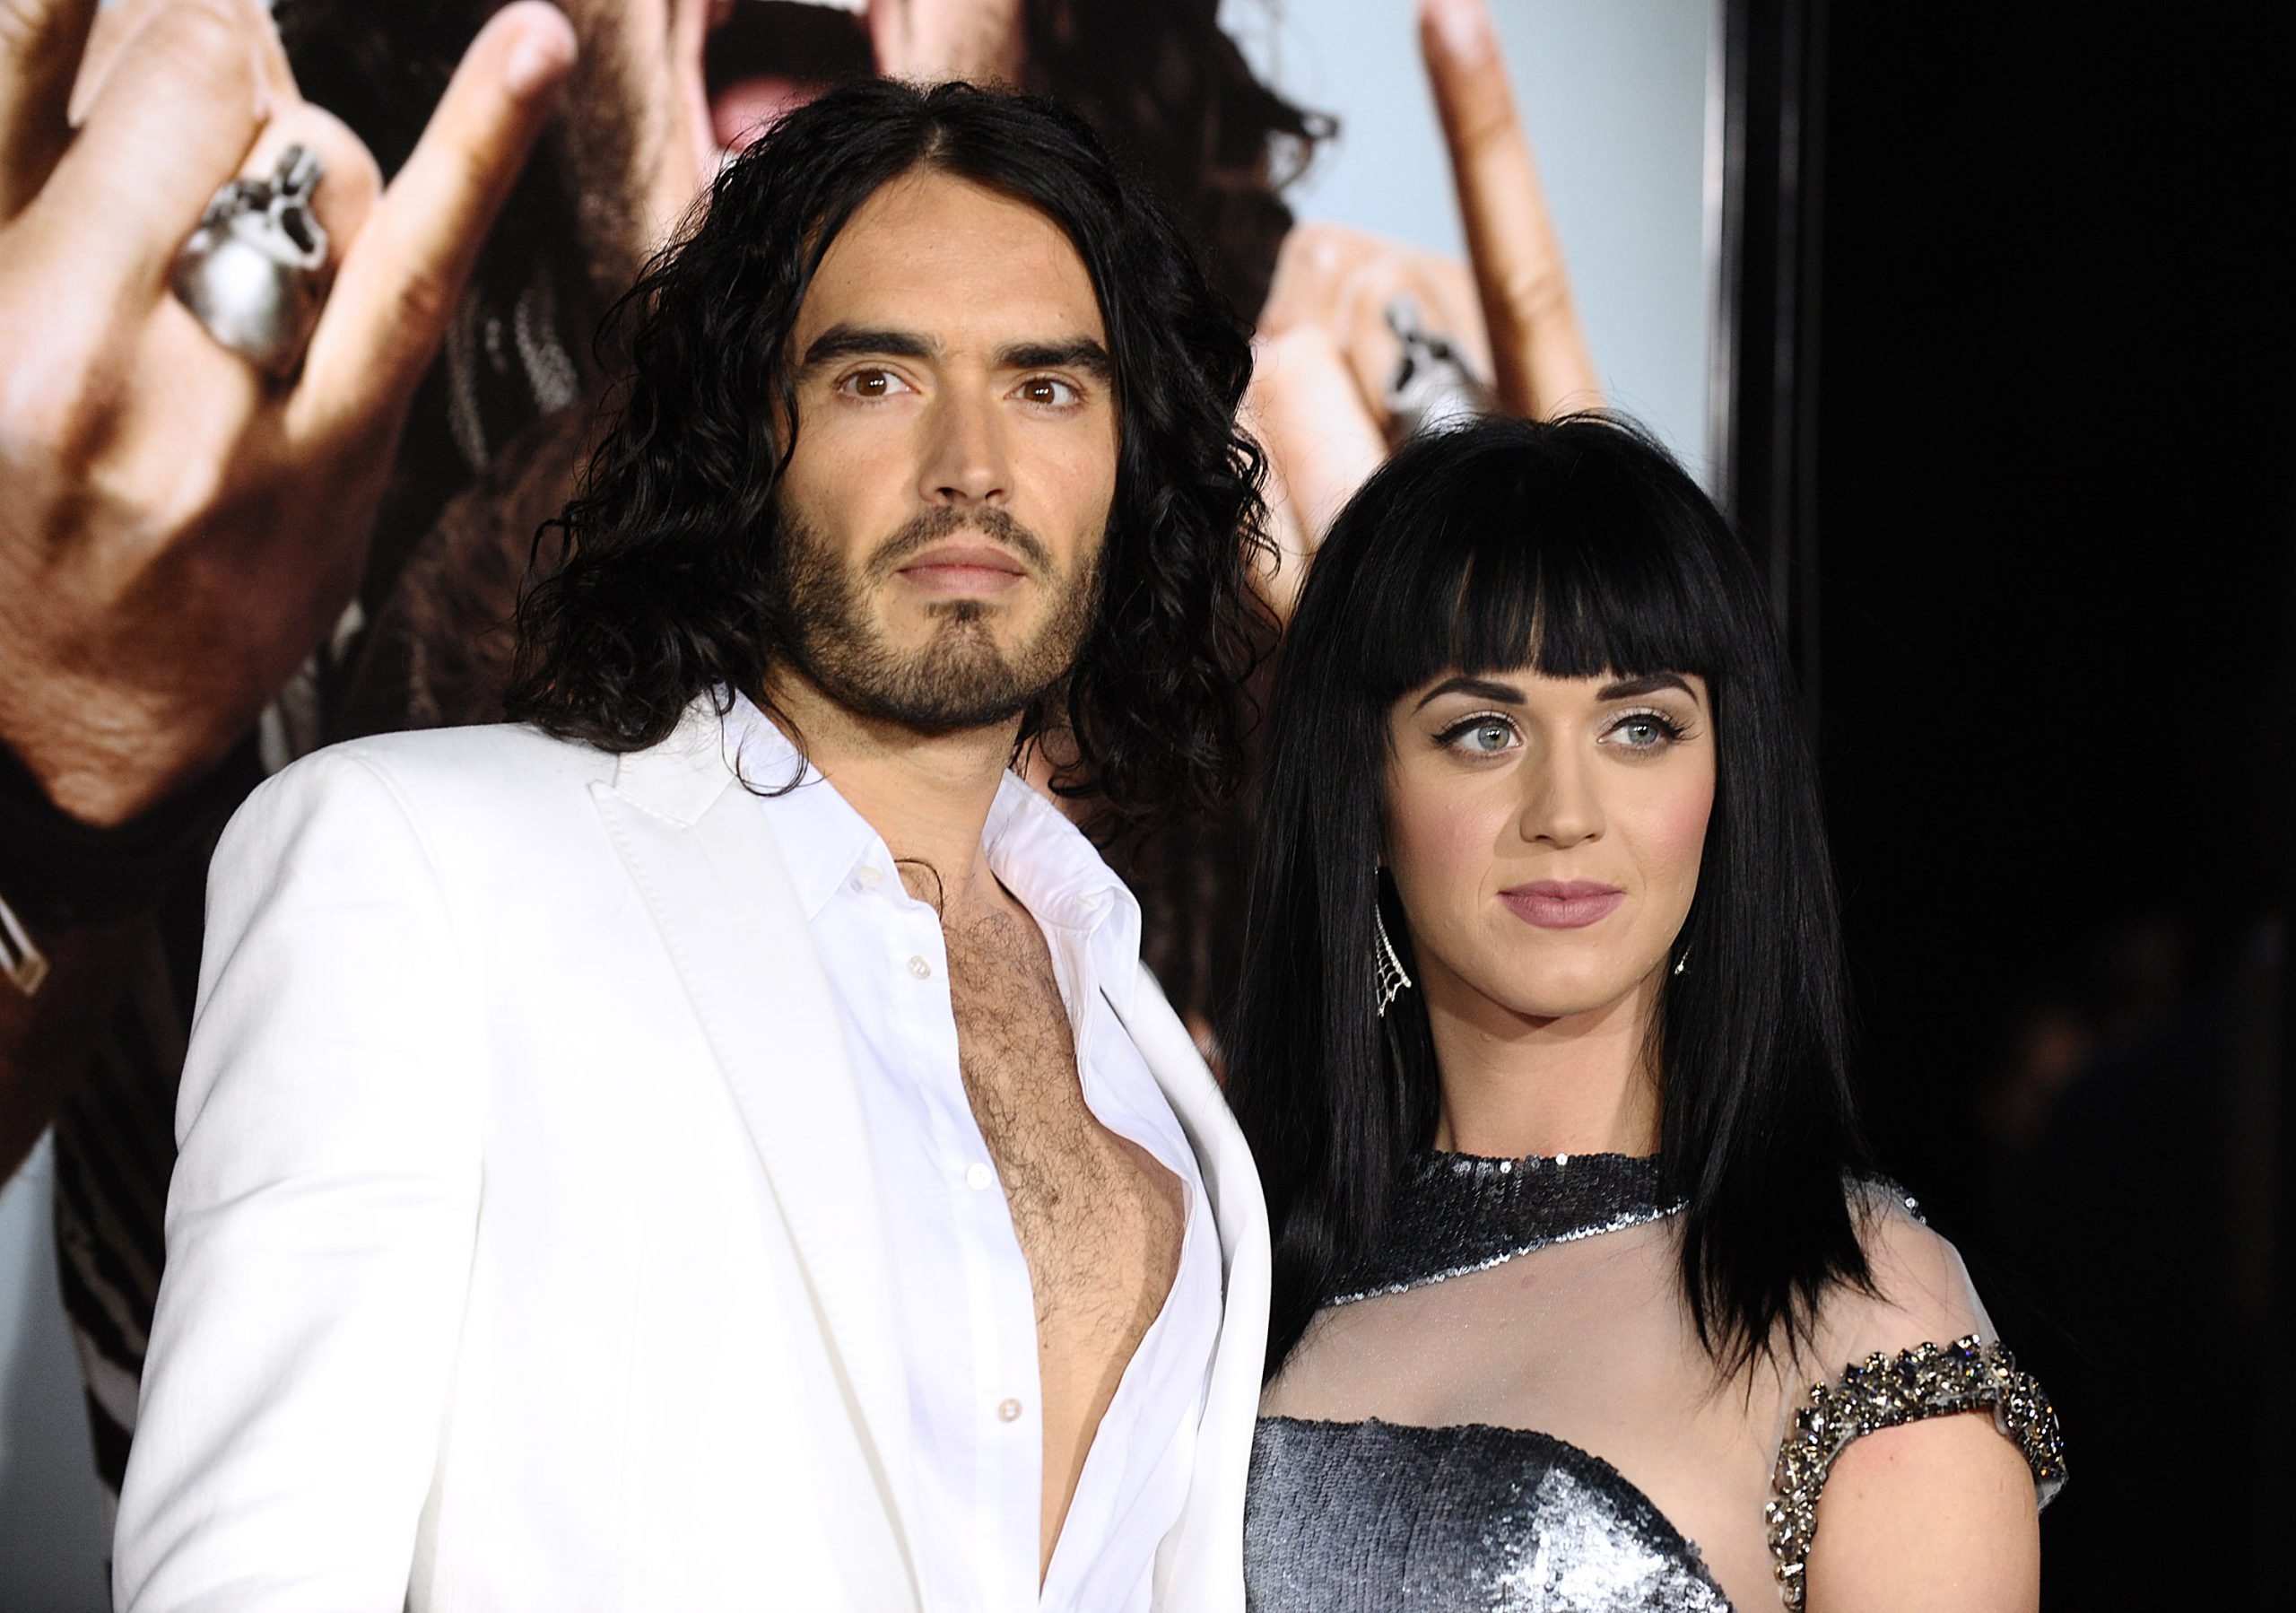 Russell Brand standing next to "Part of Me" singer Katy Perry